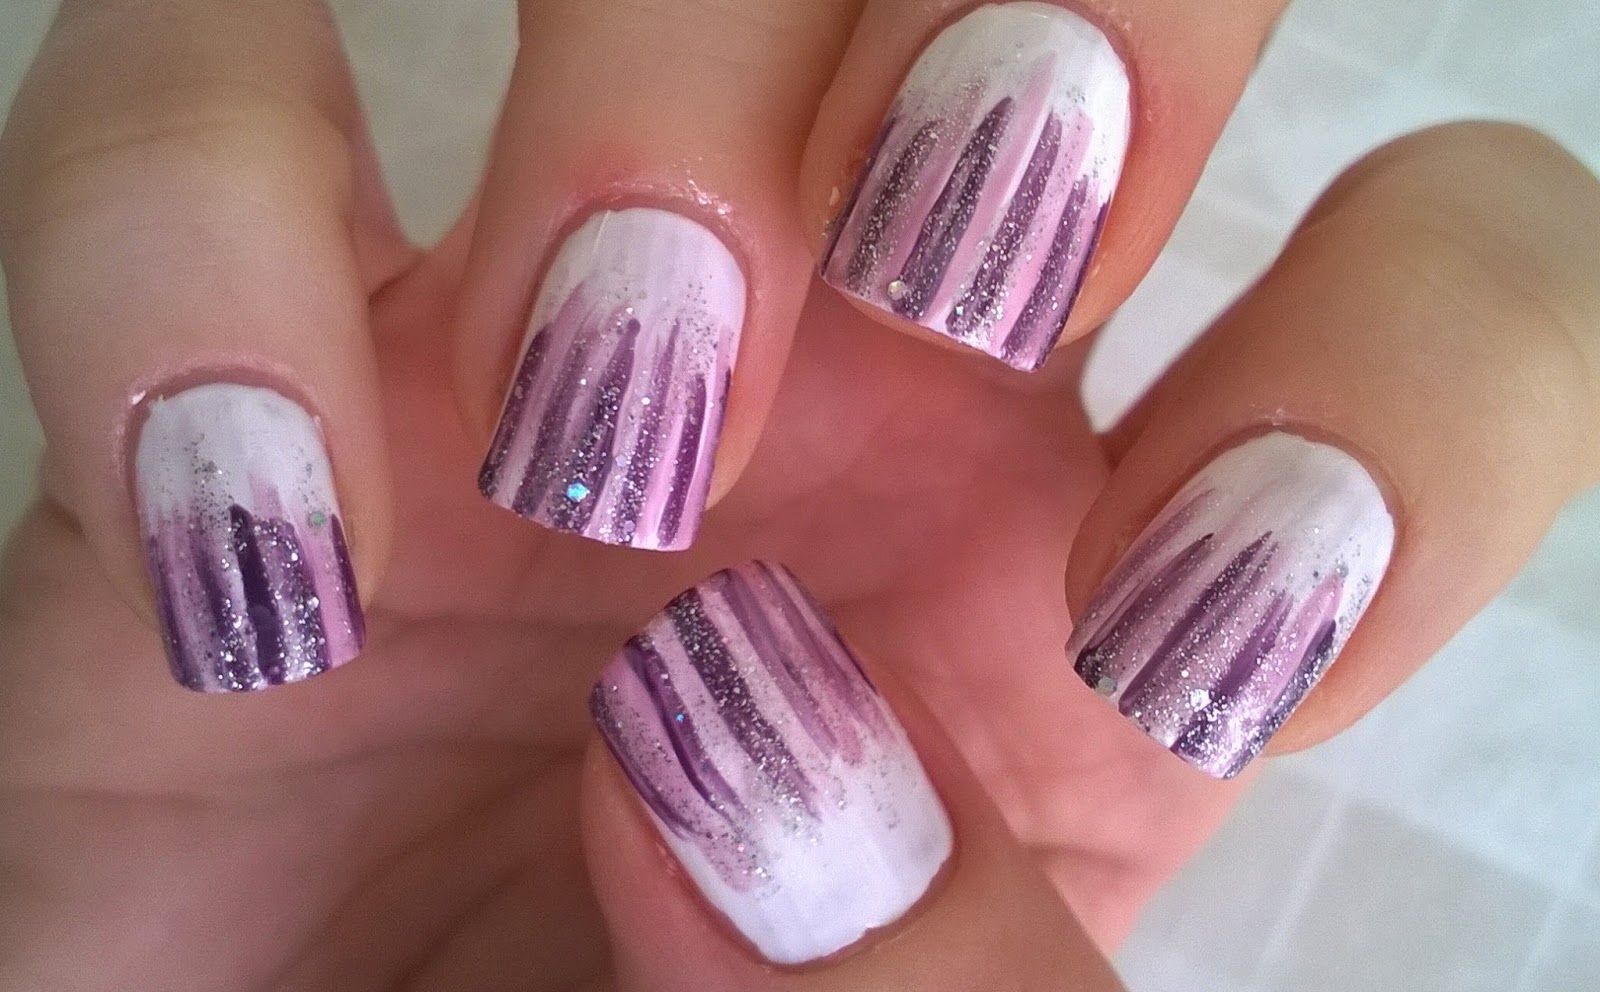 3. Lilac and Gold Glitter Nail Design - wide 3